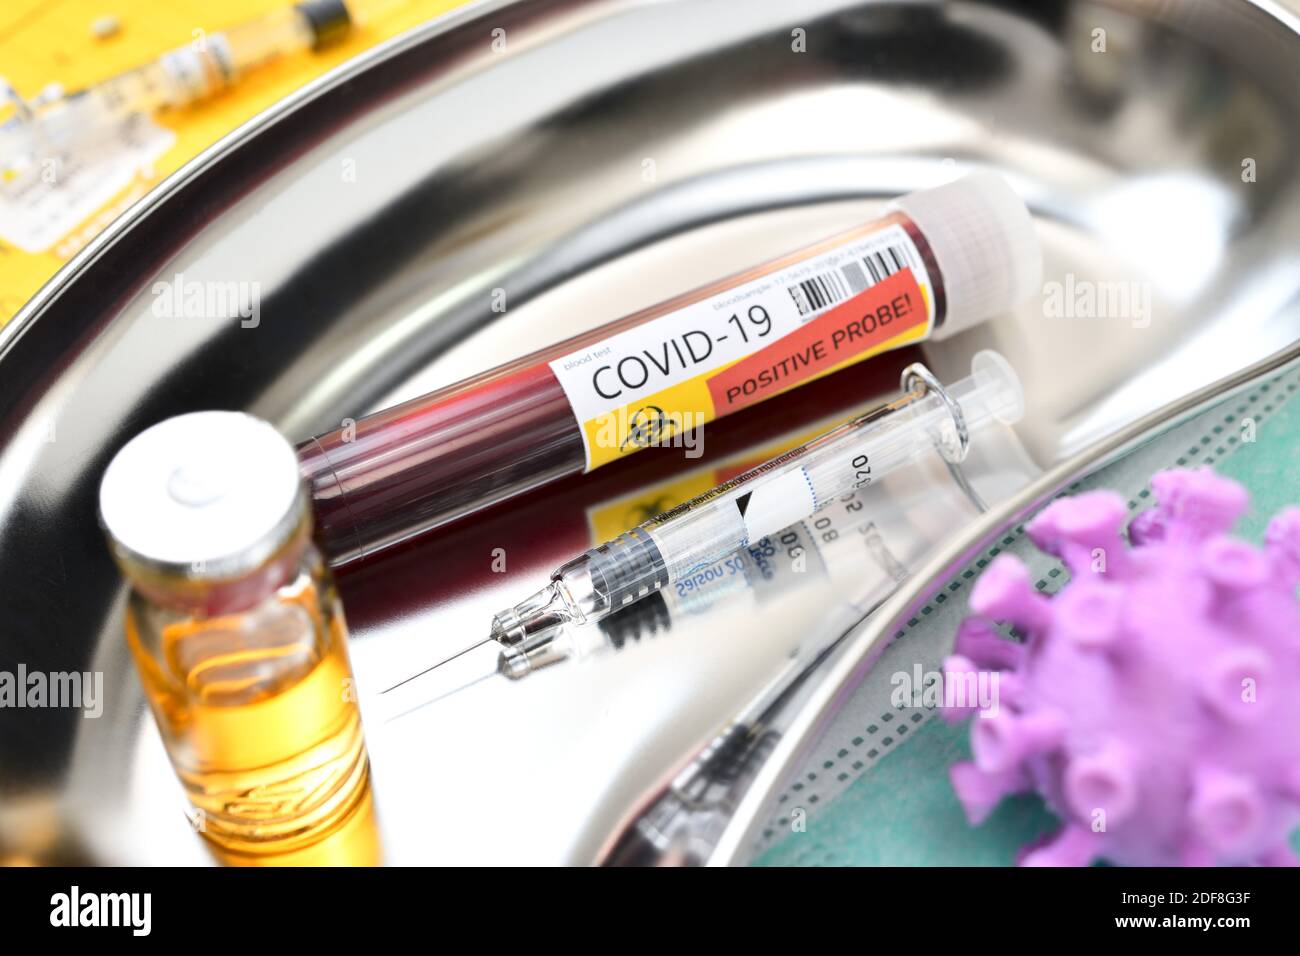 Syringe, Vaccine Vial And Blood Sample In A Kidney Dish, Covid Vaccination Stock Photo